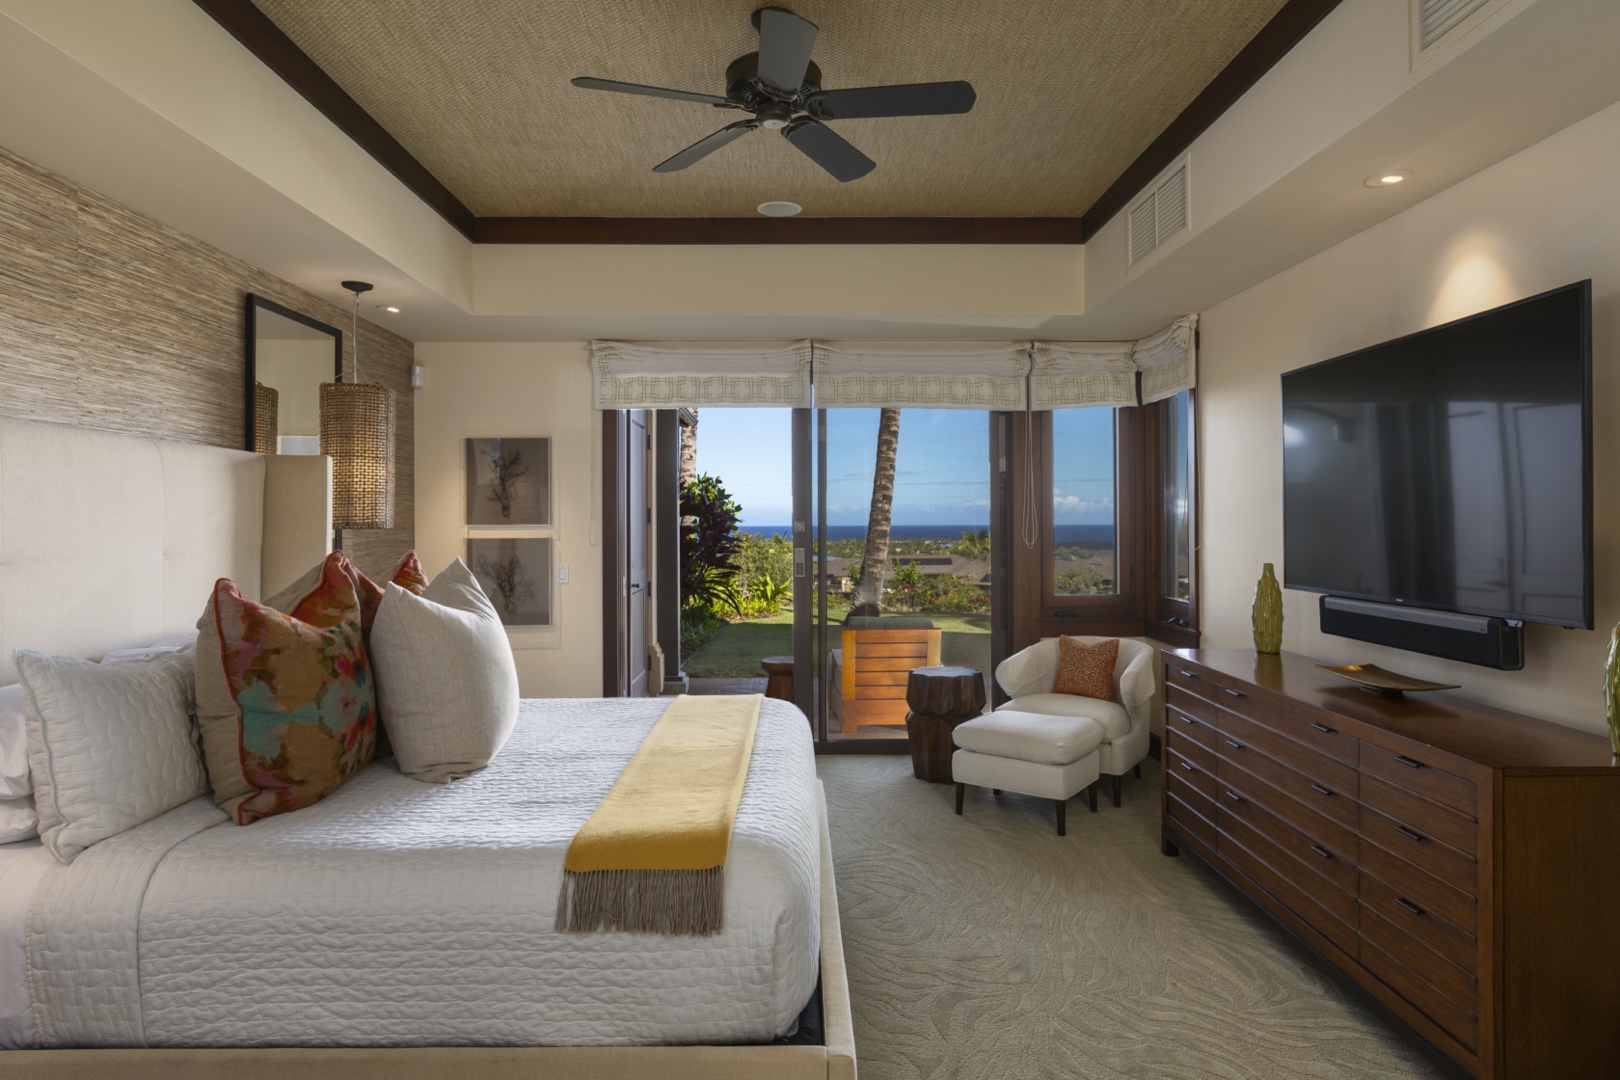 Kailua Kona Vacation Rentals, 3BD Hali'ipua Villa (108) at Four Seasons Resort at Hualalai - Primary suite with private ocean-view deck, king-size bed, and large flat-screen TV with Sonos Sound Bar.